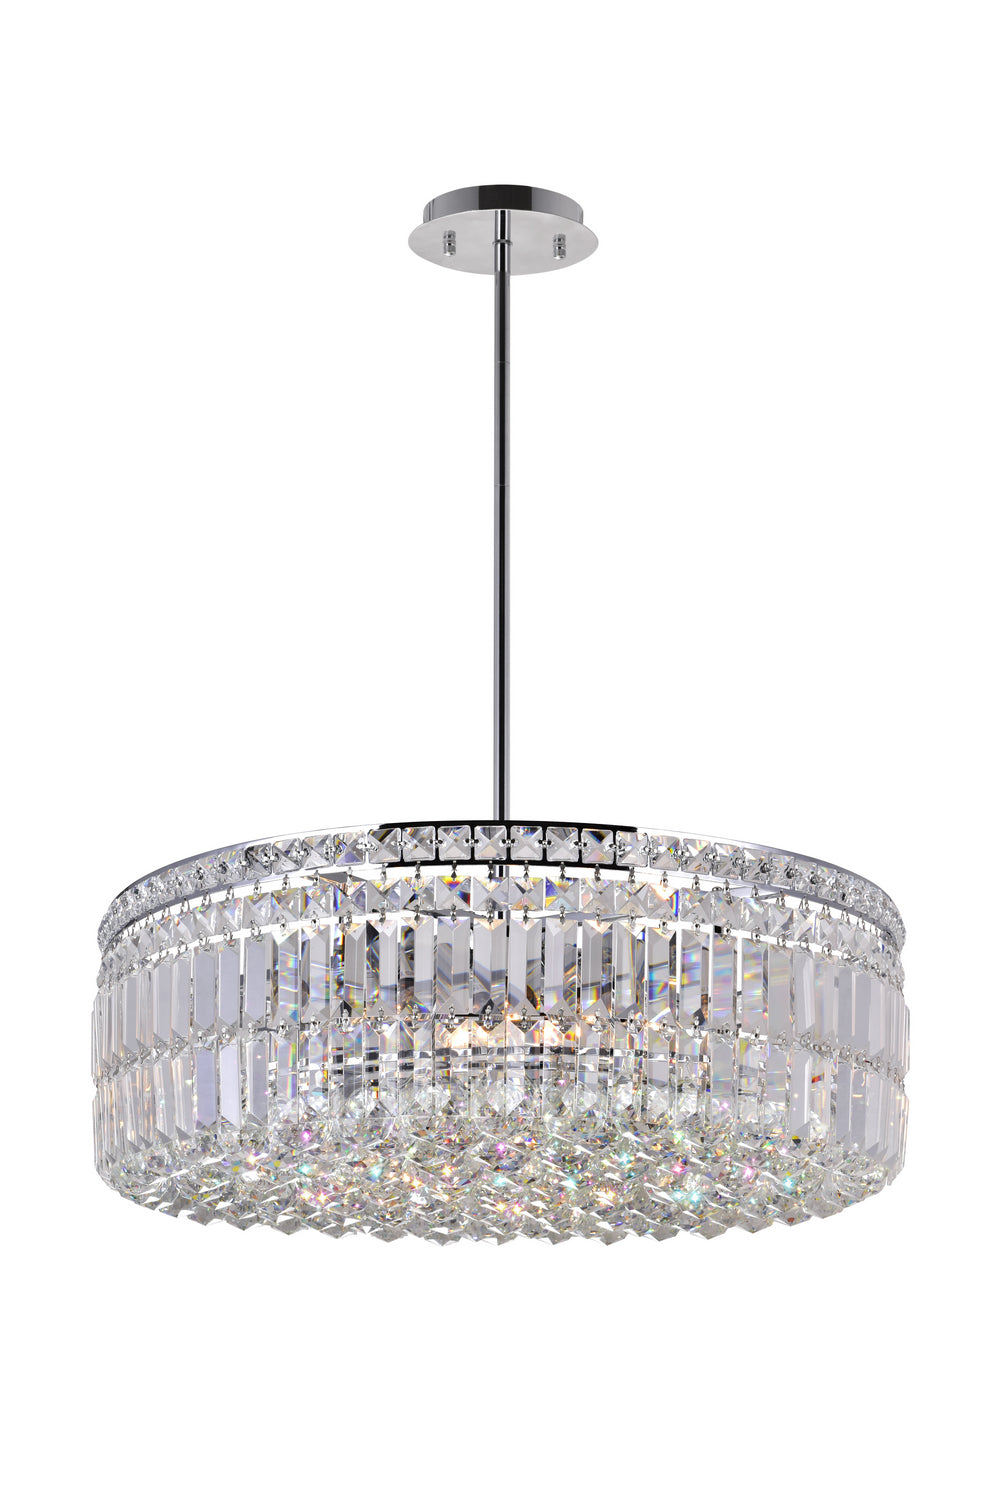 CWI Lighting Ten Light Chandelier from the Colosseum collection in Chrome finish